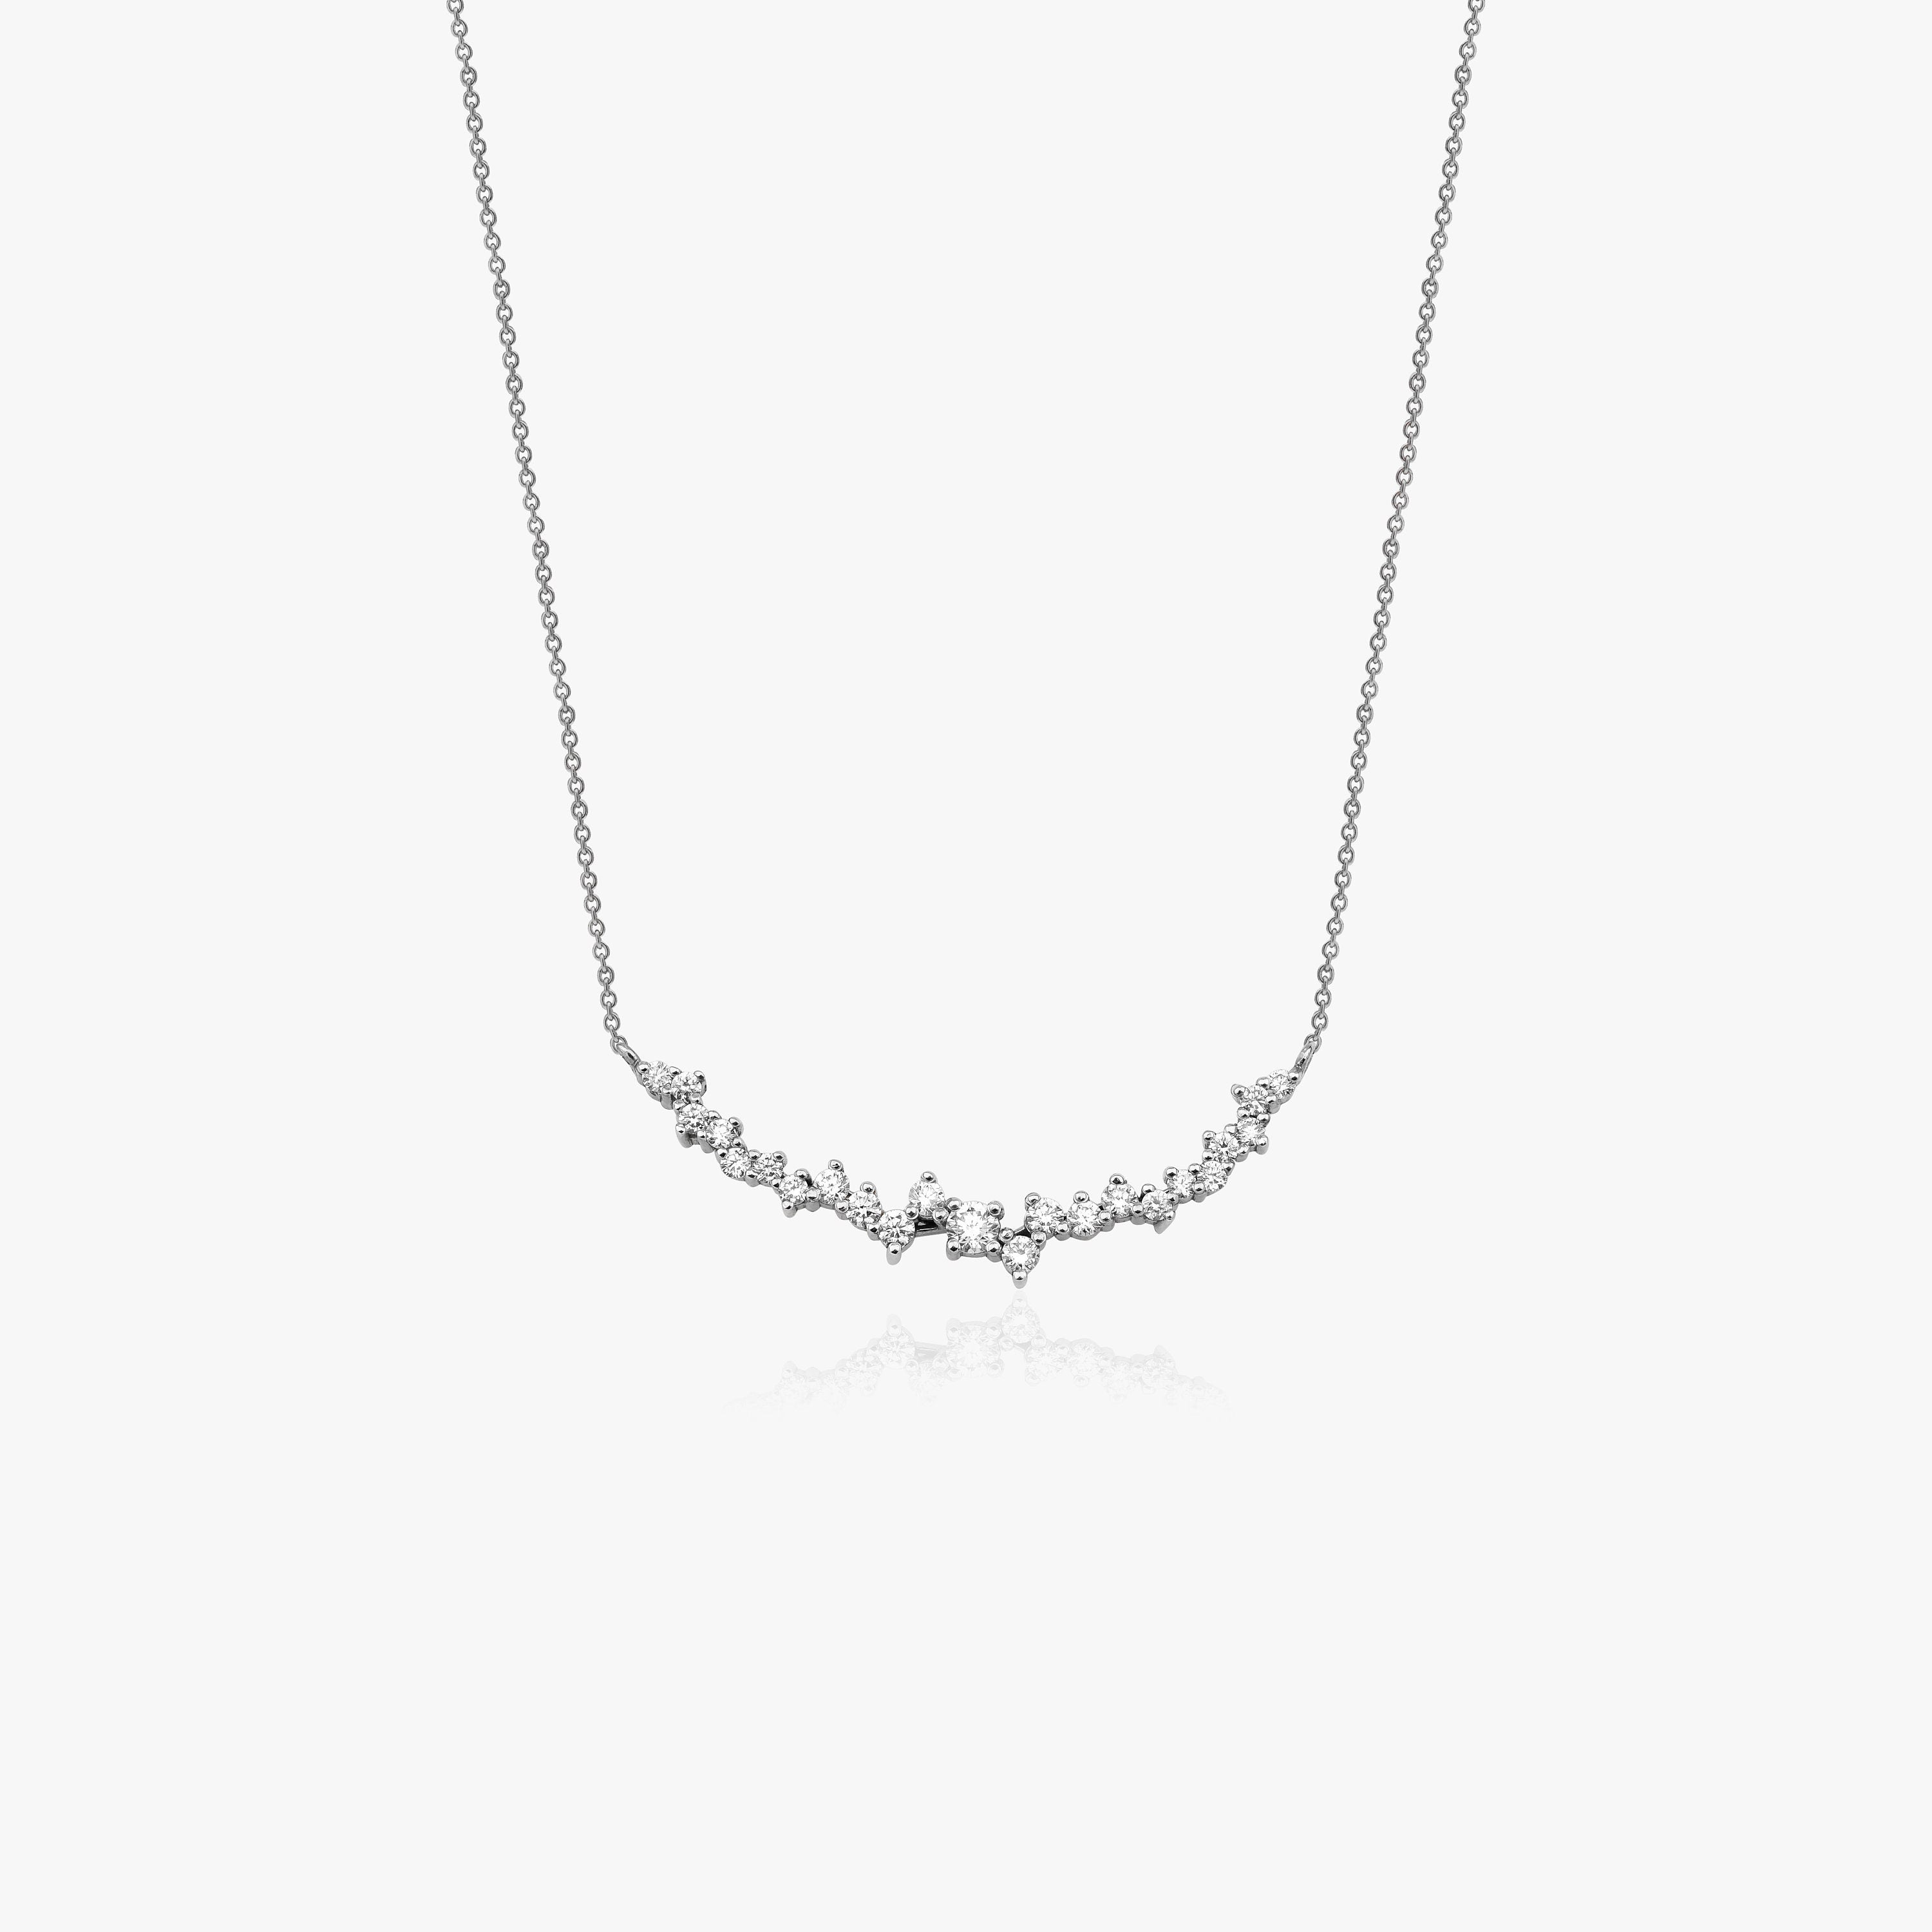 Diamond Cluster Necklace Available in 14K and 18K Gold